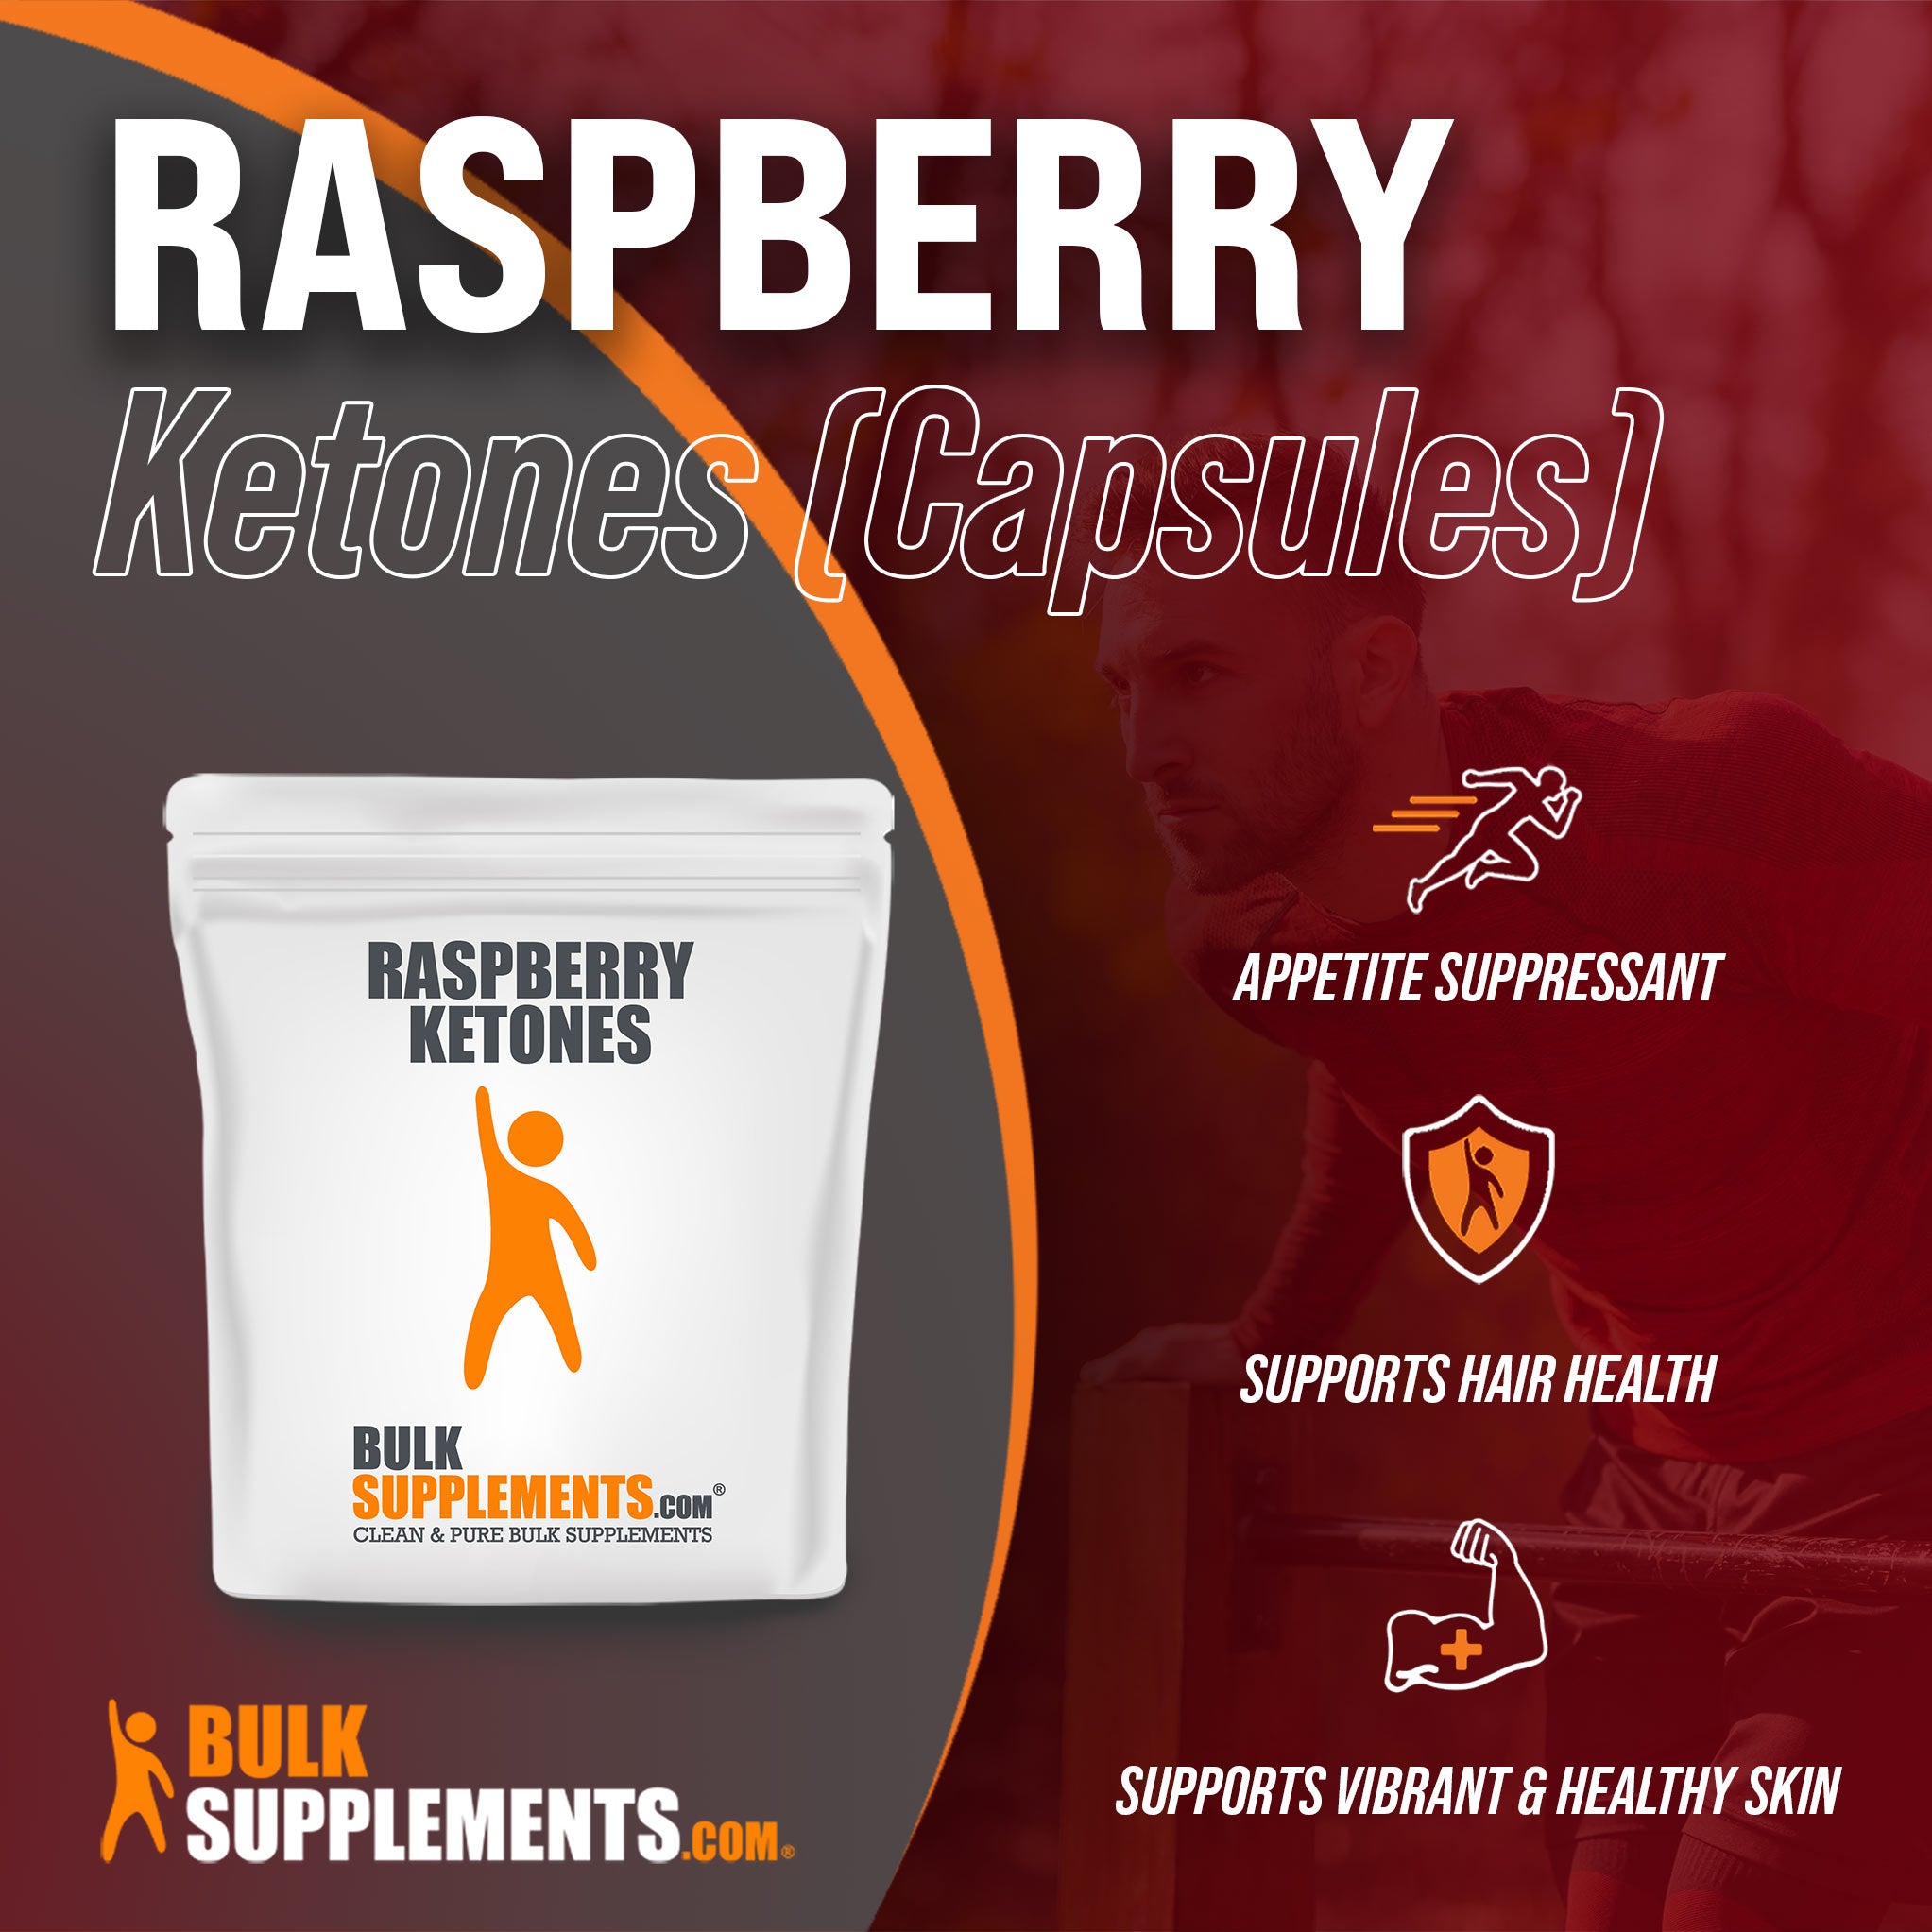 Benefits of Raspberry Ketones: appetite suppressant, supports hair health, supports vibrant and healthy skin